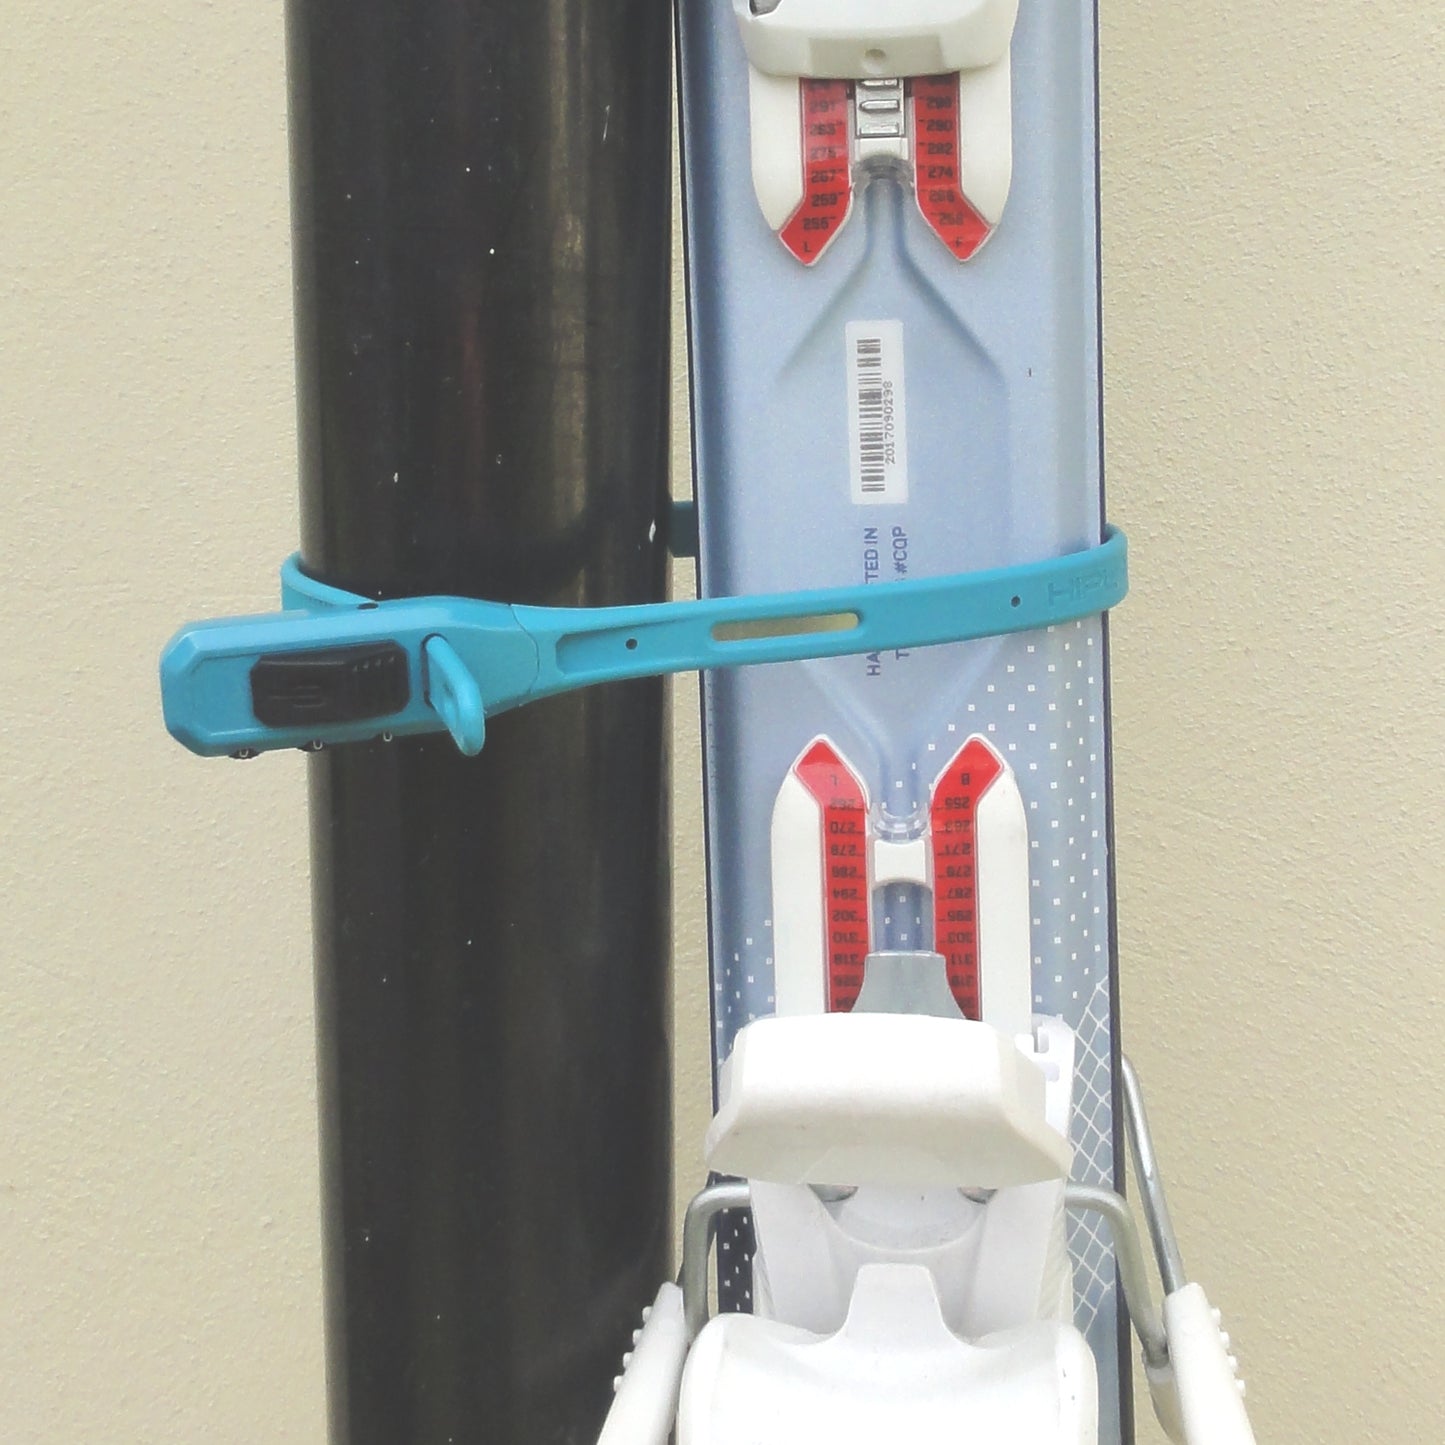 Skis held vertically to a fixed drainpipe by turquoise combination cable-tie style Z lock